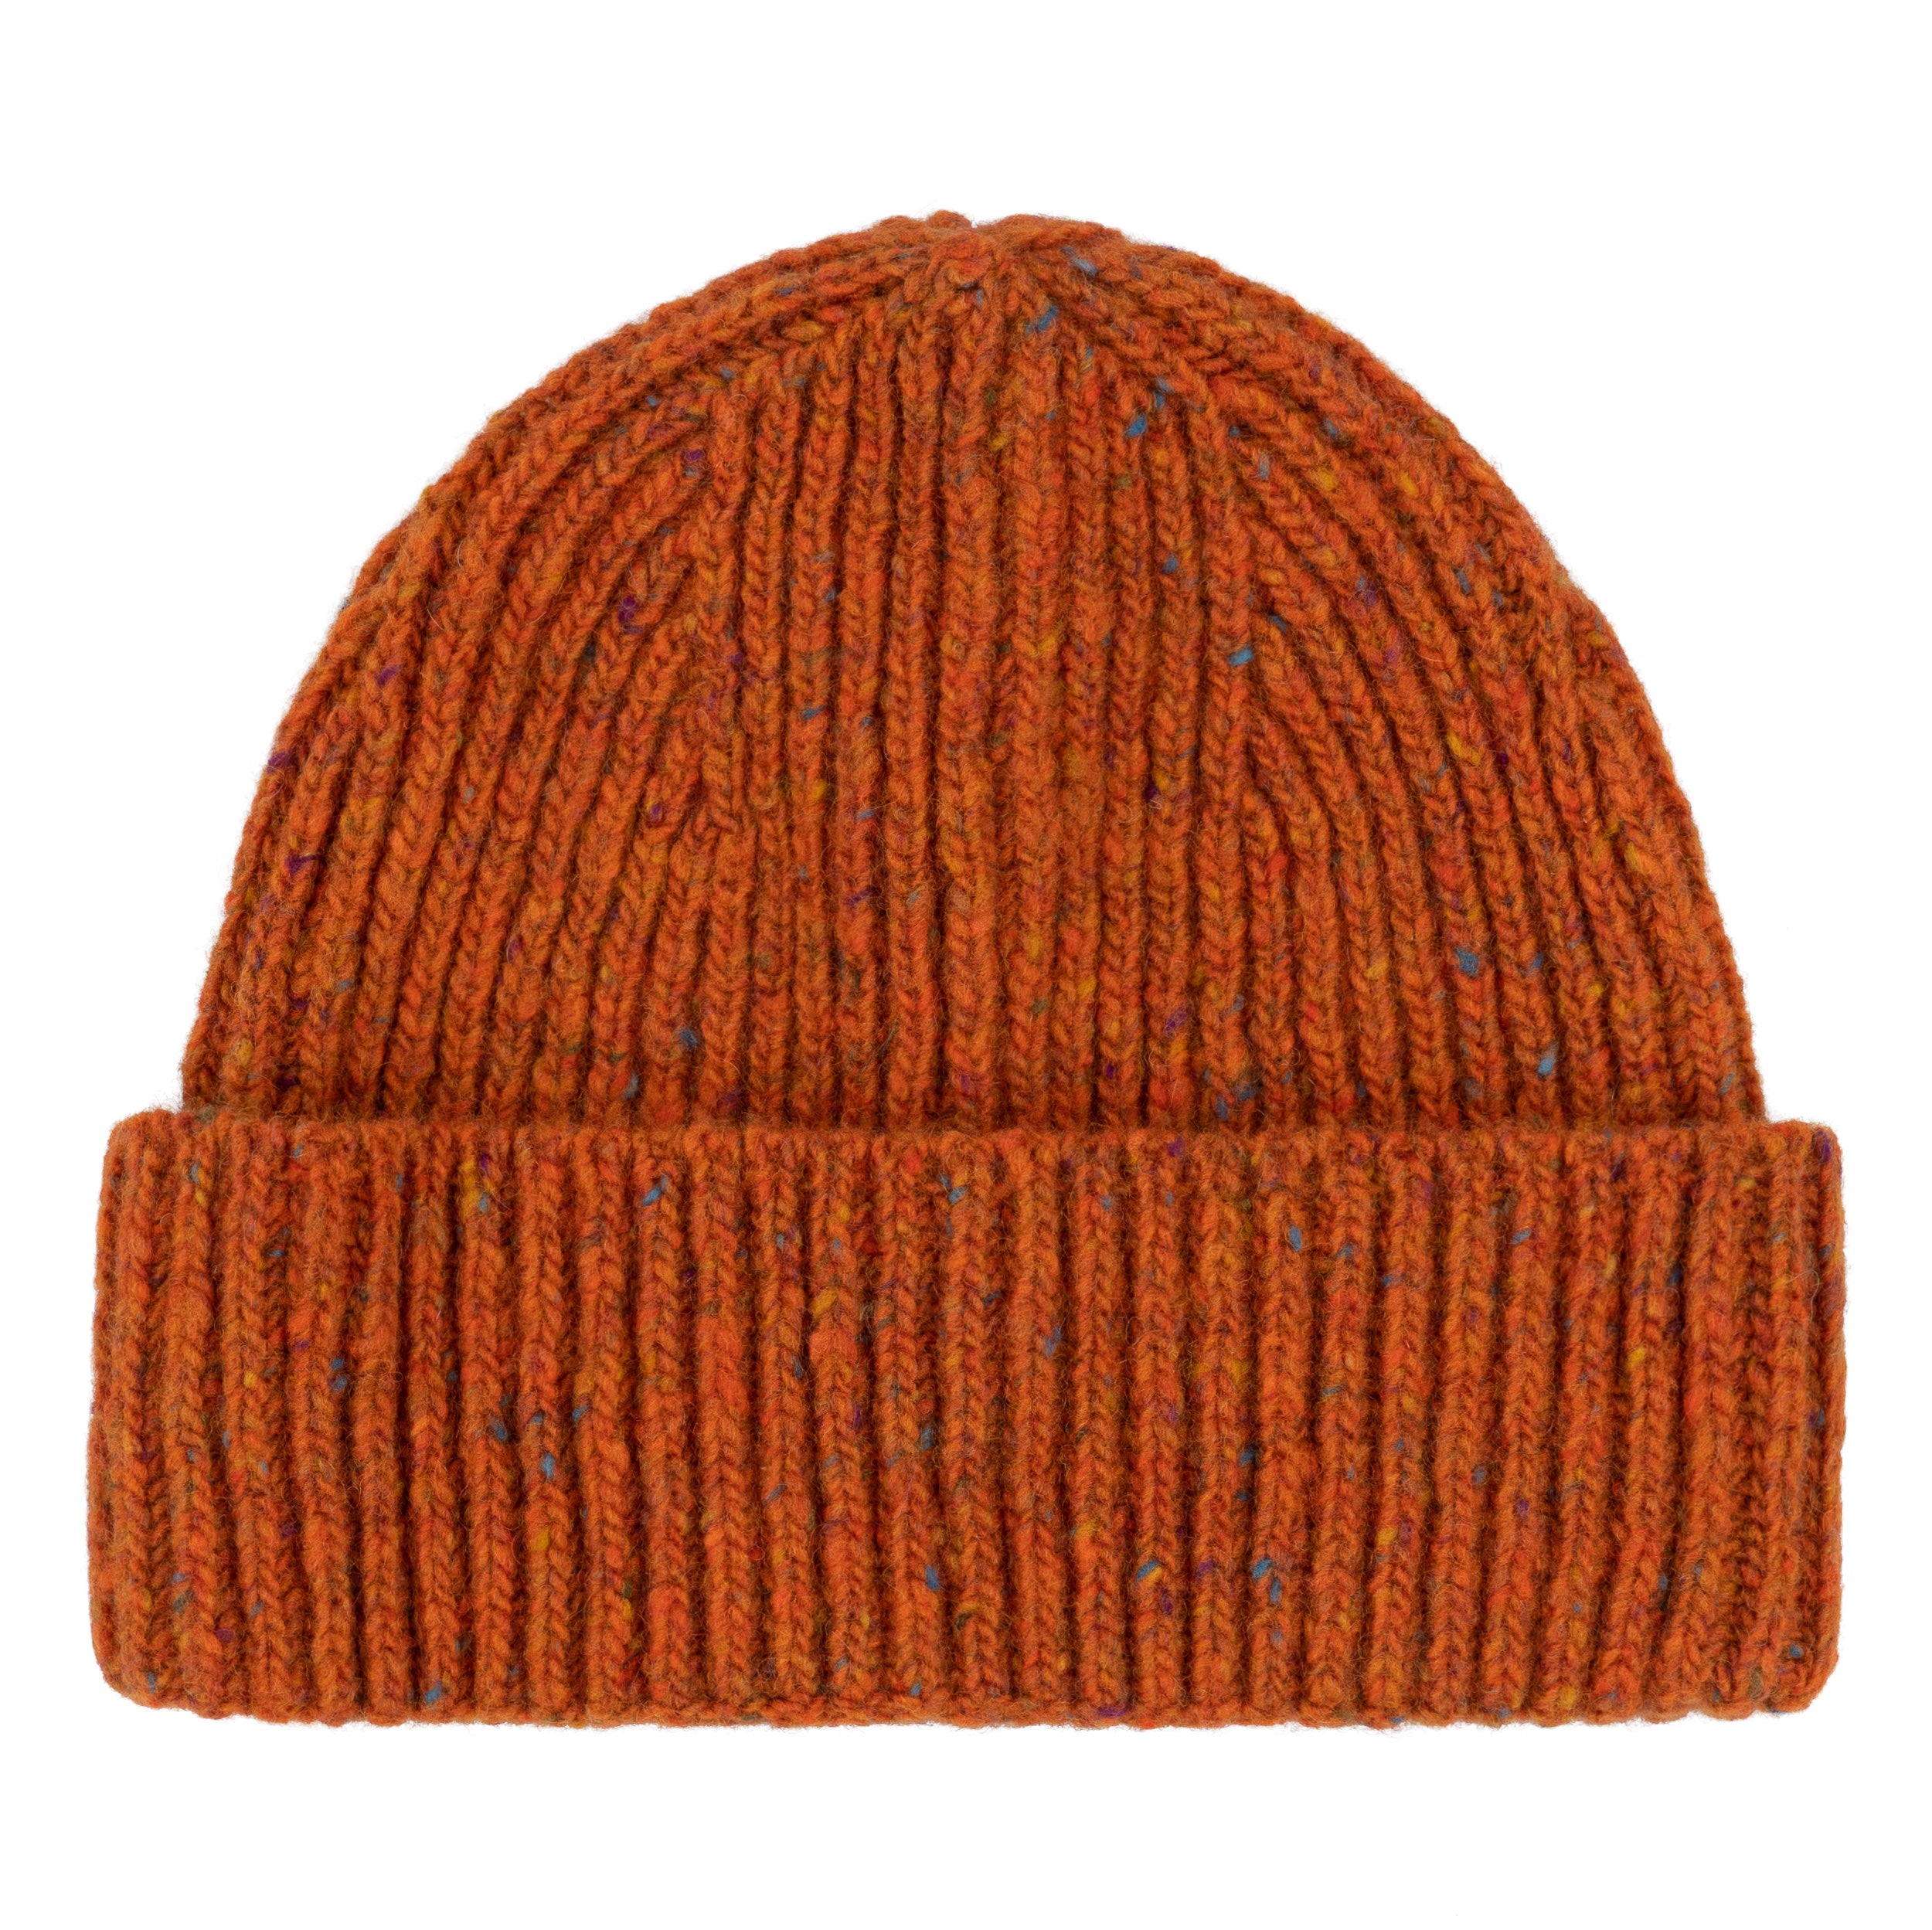 Carrier Company Donegal Wool Hat in Tangerine